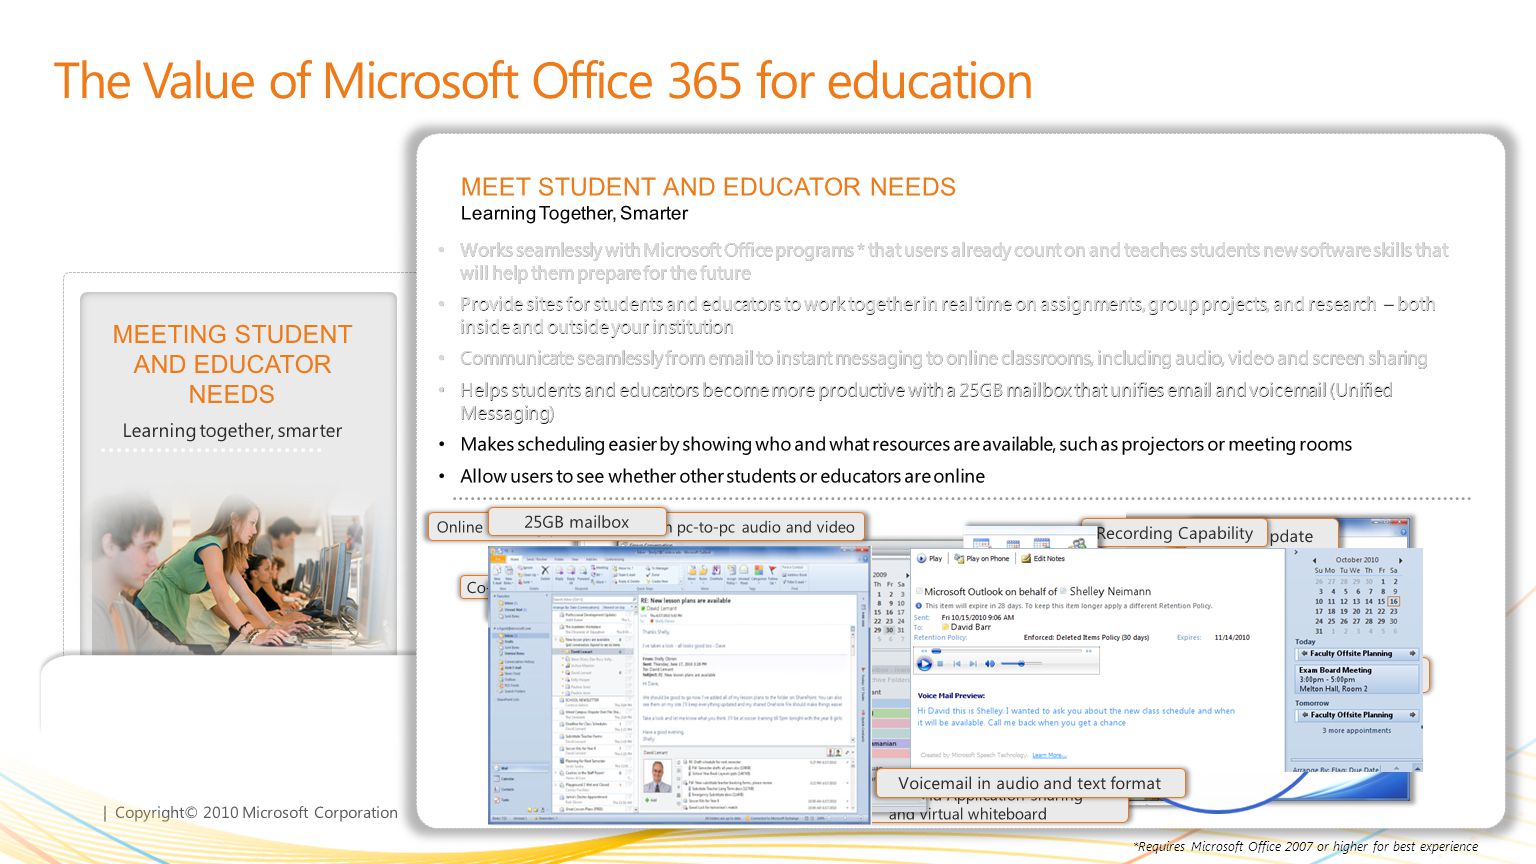 | Copyright© 2010 Microsoft Corporation GETTING MORE FOR LESS Deliver more IT functionality at reduced cost MEETING STUDENT AND EDUCATOR NEEDS Learning together, smarter The Value of Microsoft Office 365 for education LEARNING FROM ANYWHERE * Solve problems from more places ENTERPRISE CLASS SECURITY, RELIABILITY, AND PRIVACY Keeps you in control MEET STUDENT AND EDUCATOR NEEDS Learning Together, Smarter Works seamlessly with Microsoft Office programs * that users already count on and teaches students new software skills that will help them prepare for the future Provide sites for students and educators to work together in real time on assignments, group projects, and research – both inside and outside your institution Communicate seamlessly from  to instant messaging to online classrooms, including audio, video and screen sharing Helps students and educators become more productive with a 25GB mailbox that unifies  and voic (Unified Messaging) Makes scheduling easier by showing who and what resources are available, such as projectors or meeting rooms Allow users to see whether other students or educators are online Works seamlessly with Microsoft Office programs * that users already count on and teaches students new software skills that will help them prepare for the future Provide sites for students and educators to work together in real time on assignments, group projects, and research – both inside and outside your institution Communicate seamlessly from  to instant messaging to online classrooms, including audio, video and screen sharing Helps students and educators become more productive with a 25GB mailbox that unifies  and voic (Unified Messaging) Makes scheduling easier by showing who and what resources are available, such as projectors or meeting rooms Allow users to see whether other students or educators are online Works seamlessly with Microsoft Office programs * that users already count on and teaches students new software skills that will help them prepare for the future Provide sites for students and educators to work together in real time on assignments, group projects, and research – both inside and outside your institution Communicate seamlessly from  to instant messaging to online classrooms, including audio, video and screen sharing Helps students and educators become more productive with a 25GB mailbox that unifies  and voic (Unified Messaging) Makes scheduling easier by showing who and what resources are available, such as projectors or meeting rooms Allow users to see whether other students or educators are online Works seamlessly with Microsoft Office programs * that users already count on and teaches students new software skills that will help them prepare for the future Provide sites for students and educators to work together in real time on assignments, group projects, and research – both inside and outside your institution Communicate seamlessly from  to instant messaging to online classrooms, including audio, video and screen sharing Helps students and educators become more productive with a 25GB mailbox that unifies  and voic (Unified Messaging) Makes scheduling easier by showing who and what resources are available, such as projectors or meeting rooms Allow users to see whether other students or educators are online Works seamlessly with Microsoft Office programs * that users already count on and teaches students new software skills that will help them prepare for the future Provide sites for students and educators to work together in real time on assignments, group projects, and research – both inside and outside your institution Communicate seamlessly from  to instant messaging to online classrooms, including audio, video and screen sharing Helps students and educators become more productive with a 25GB mailbox that unifies  and voic (Unified Messaging) Makes scheduling easier by showing who and what resources are available, such as projectors or meeting rooms Allow users to see whether other students or educators are online *Requires Microsoft Office 2007 or higher for best experience Co-Authoring in Word Presence Sharing options Collaboration support Status update Activities My Sites in SharePoint Online meeting presentation with pc-to-pc audio and video Desktop and Application sharing and virtual whiteboard Recording Capability Instant messaging Easily connect with others across the institution with calendar sharing and publishing in Outlook Allow presence awareness across the institution 25GB mailbox Voic in audio and text format